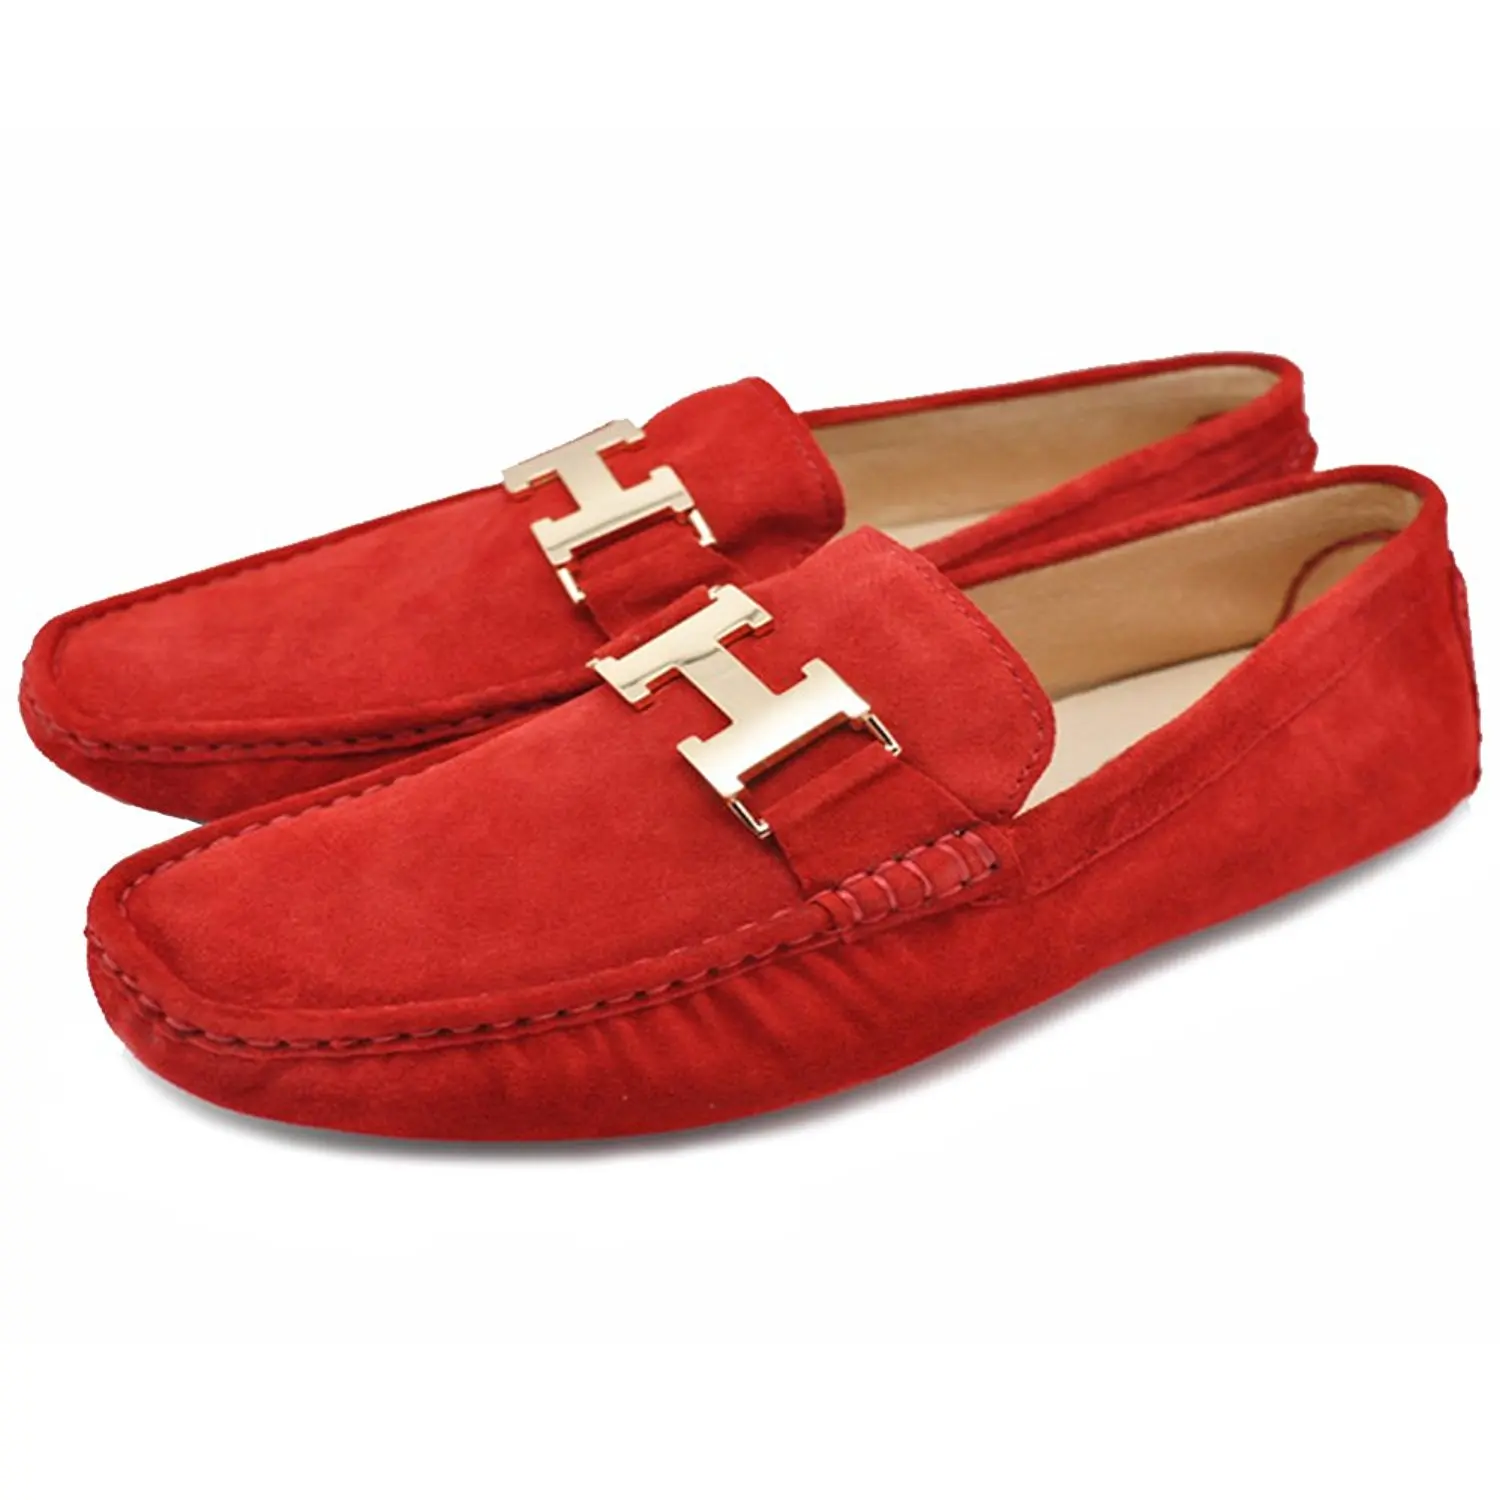 loafer shoes in red colour